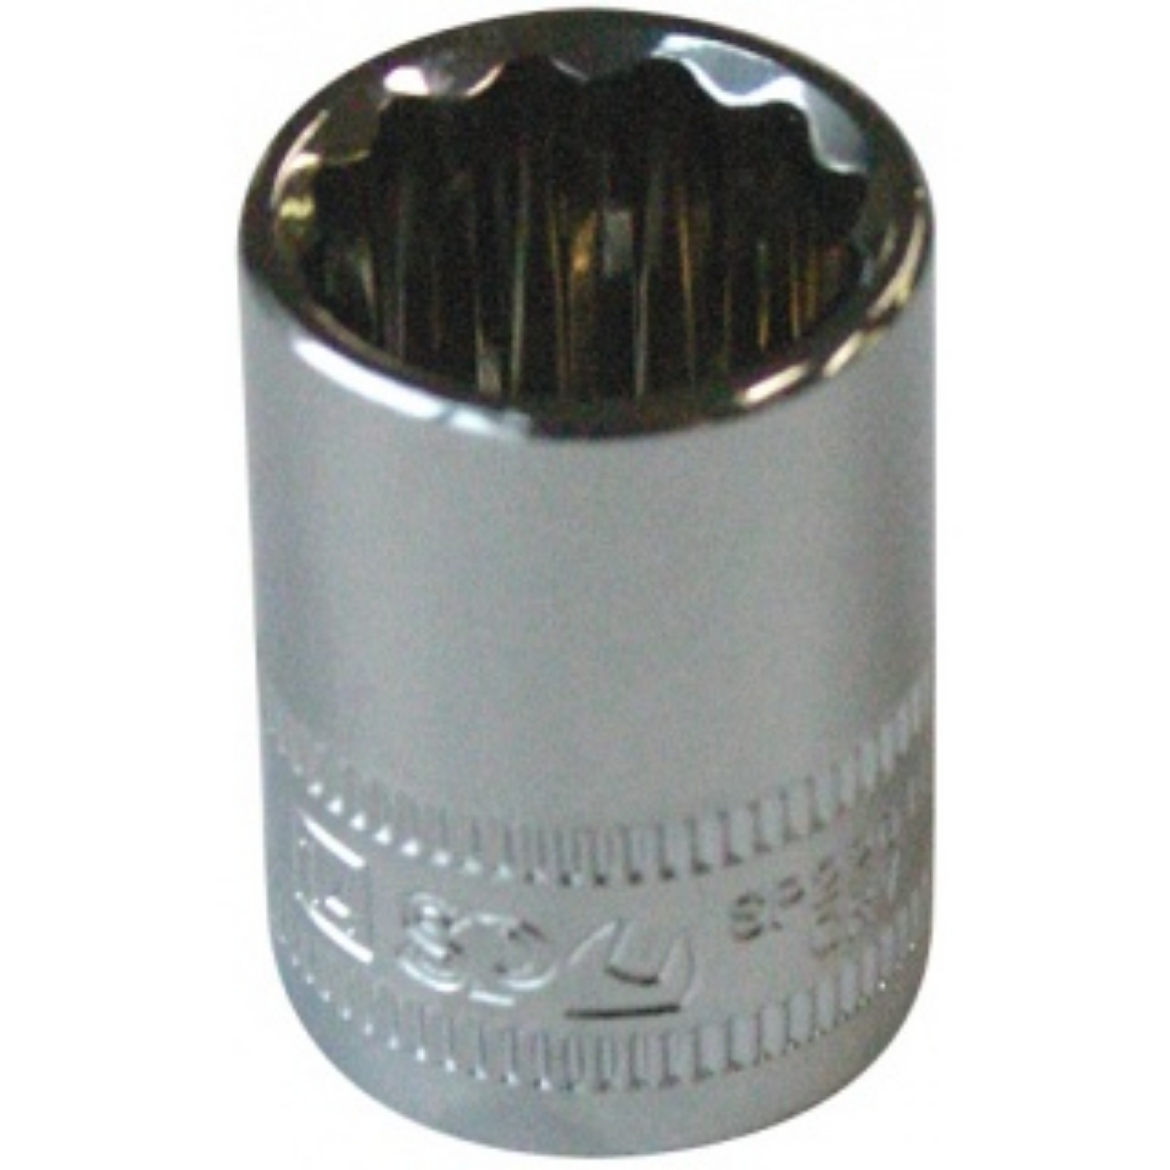 Picture of SOCKET 3/8"DR 12PT METRIC 18MM SP TOOLS